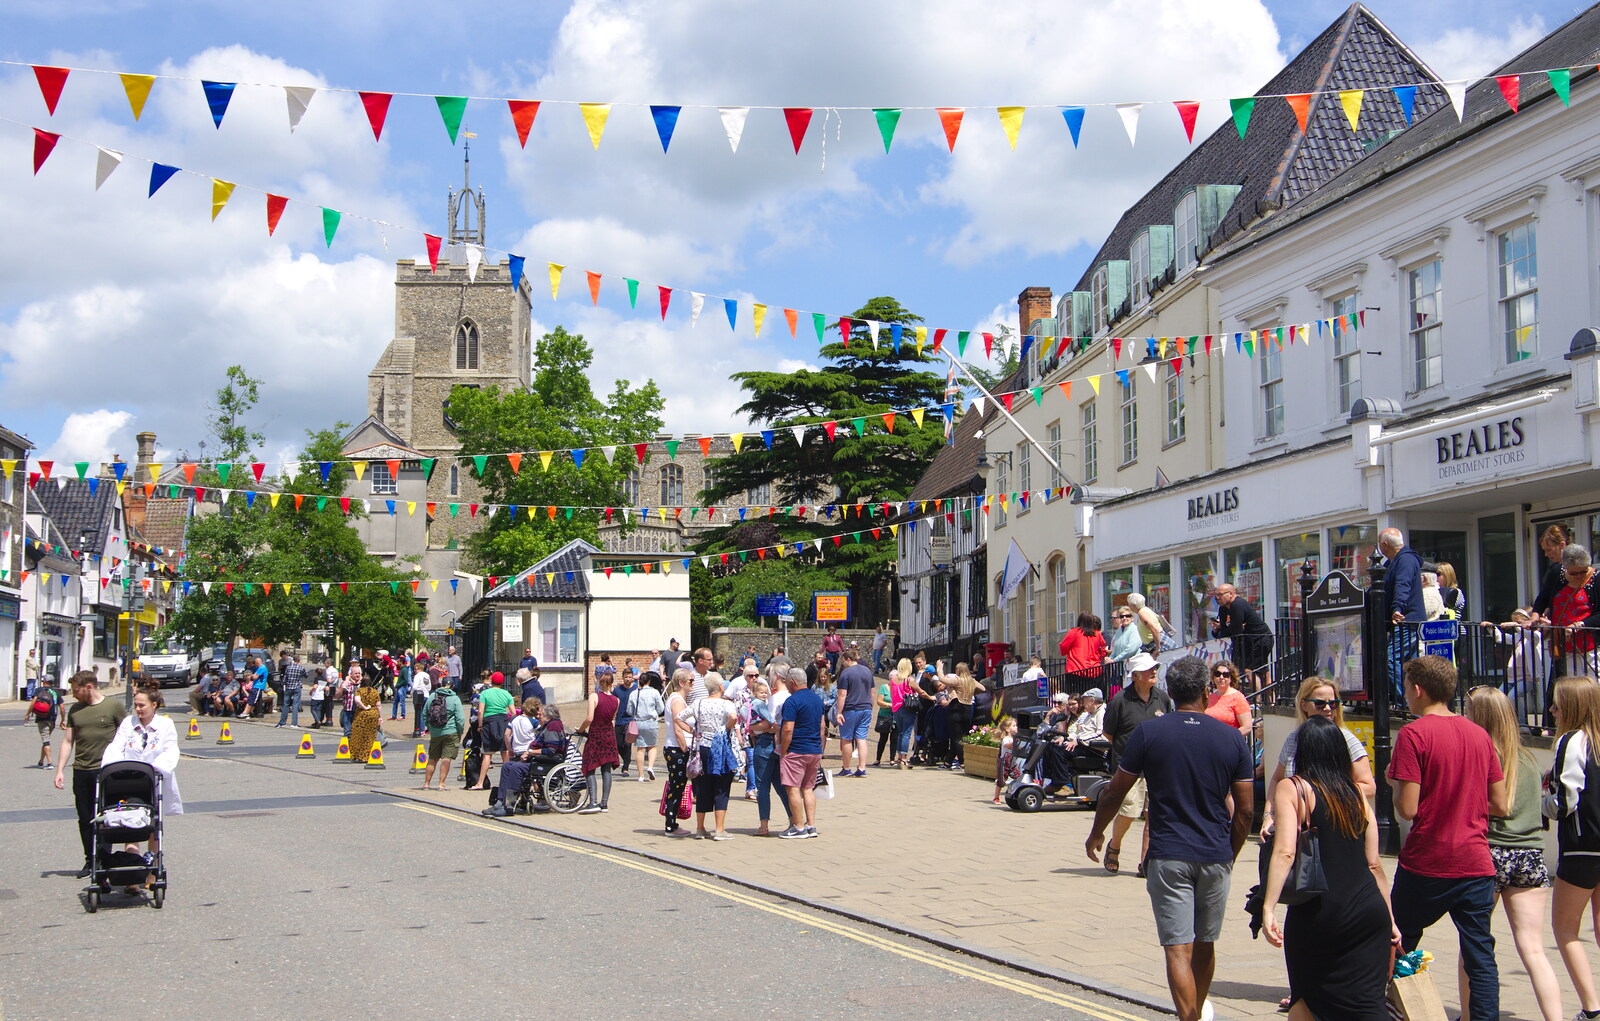 The Market Place in Diss from The Diss Carnival 2019, Diss, Norfolk - 9th June 2019